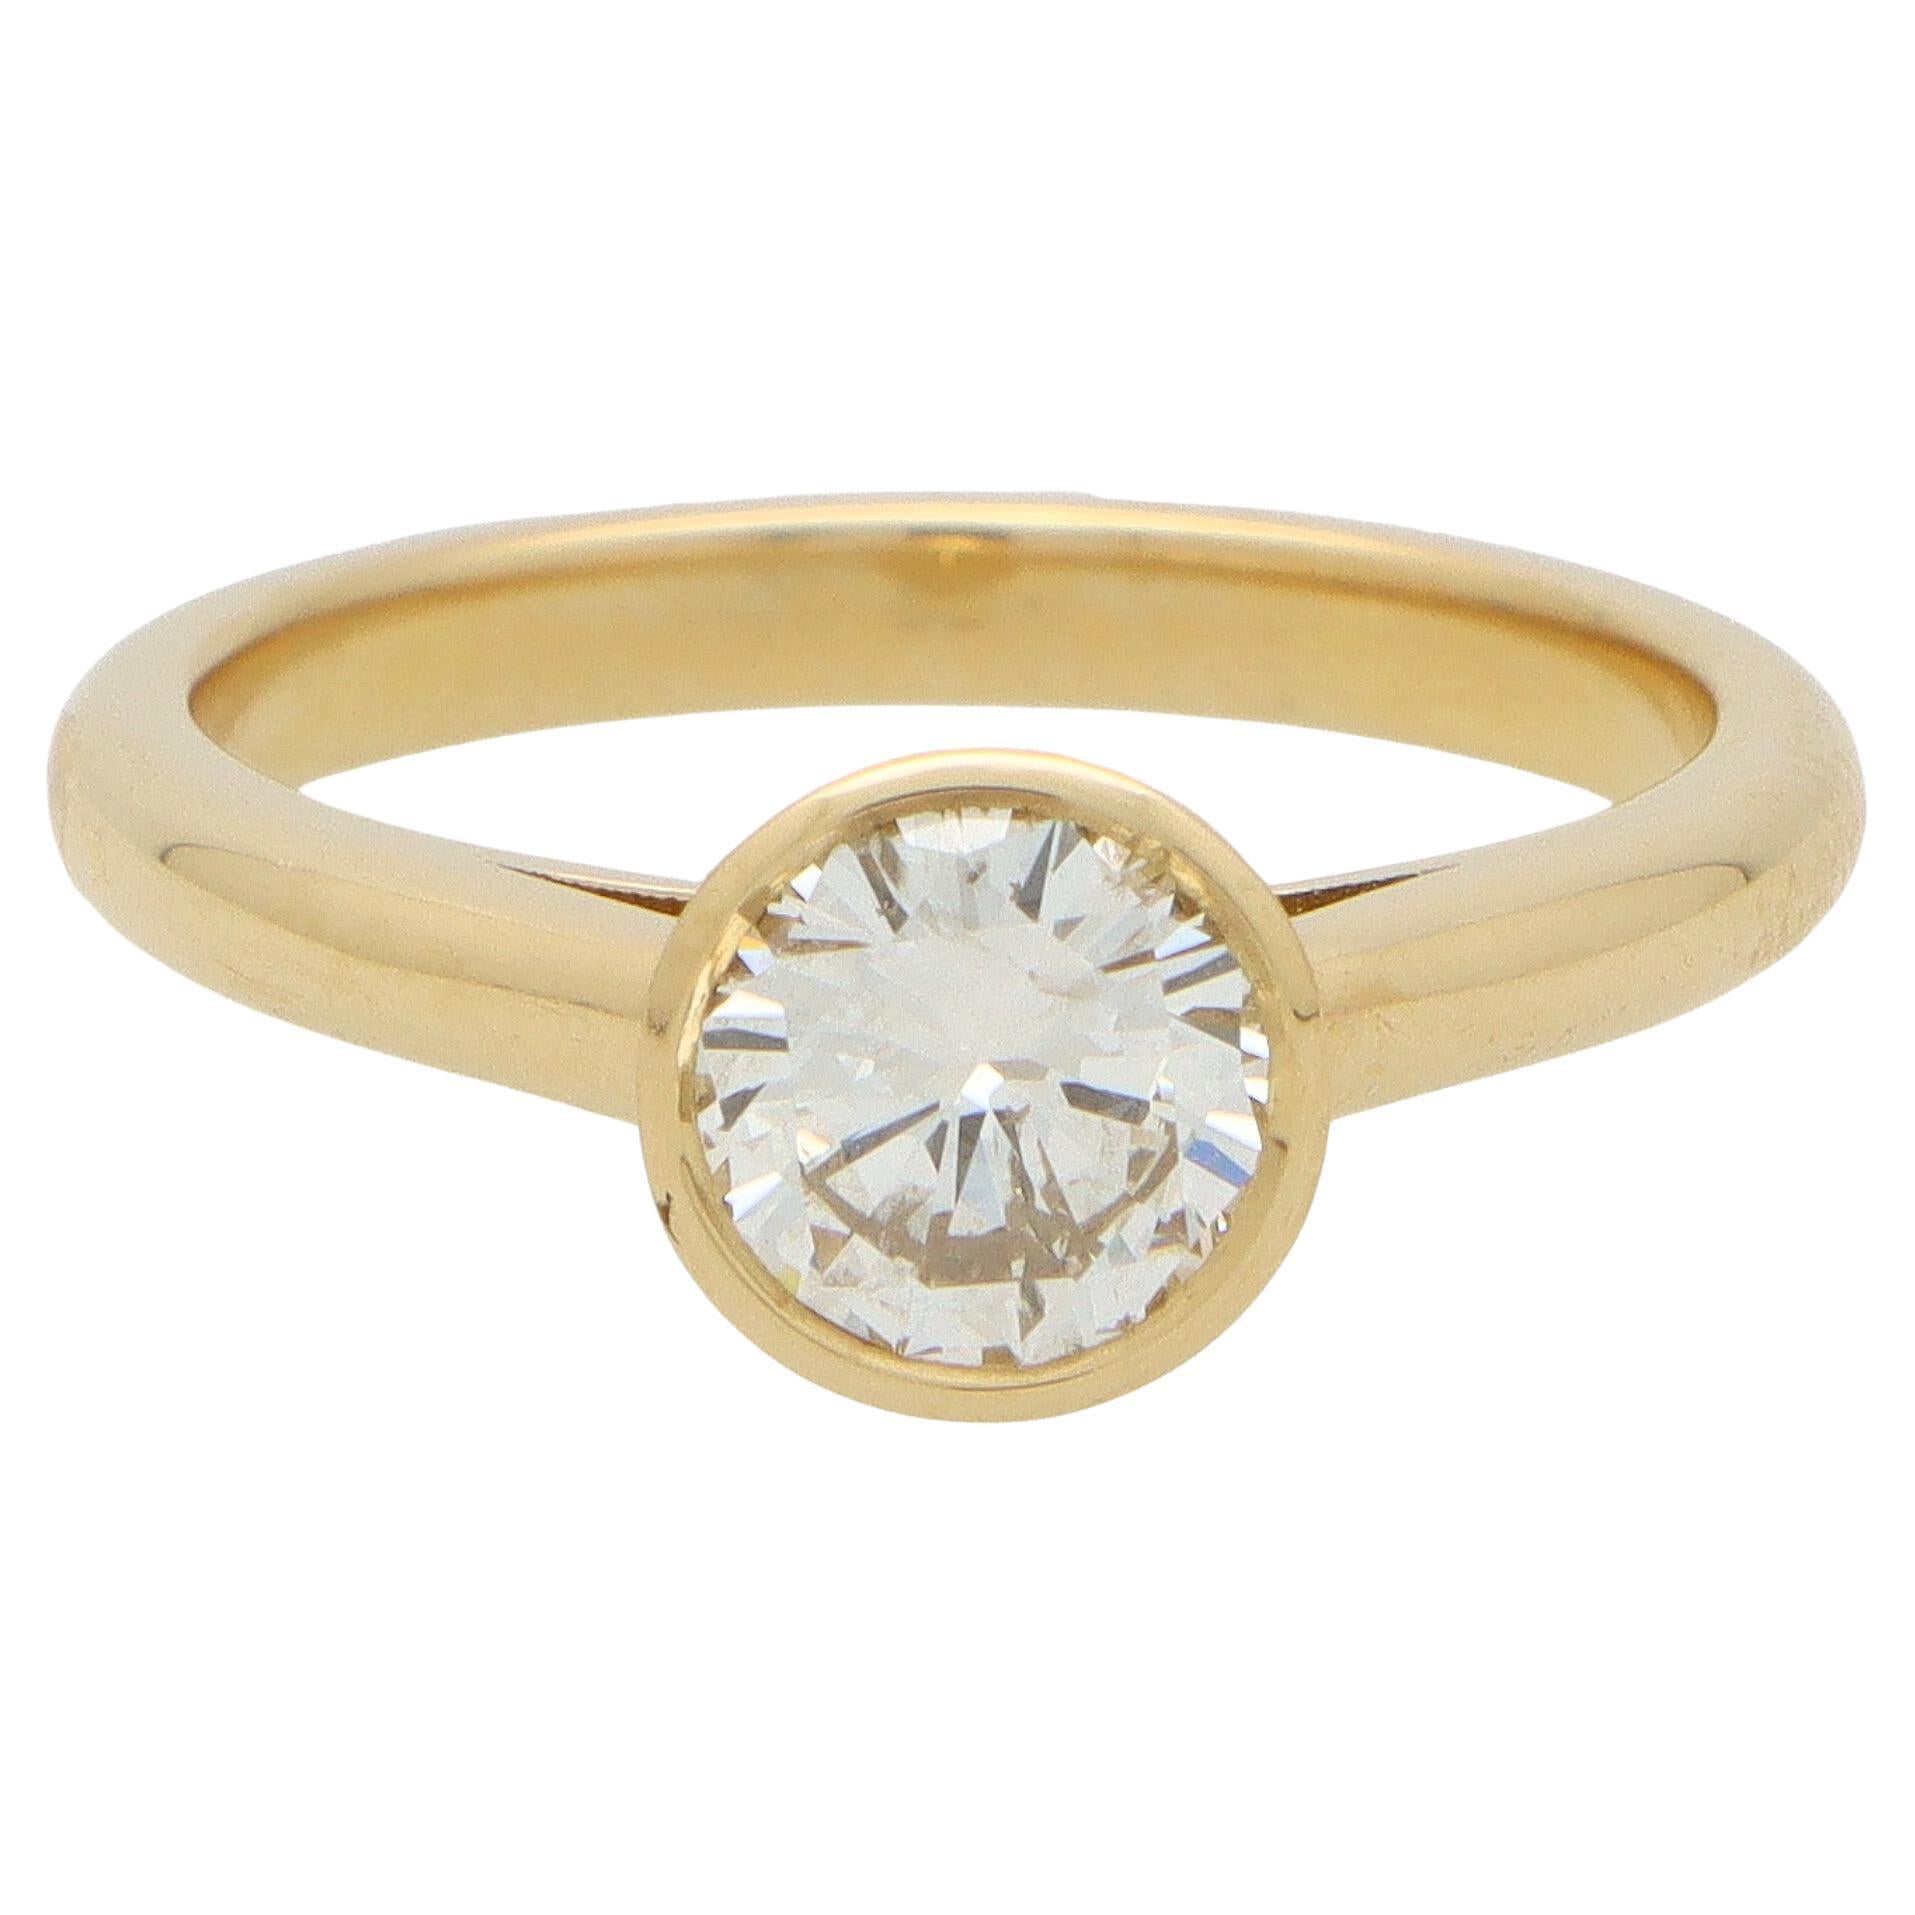 Certified Bezel Set Single Solitaire Diamond Engagement Ring in 18k Yellow Gold